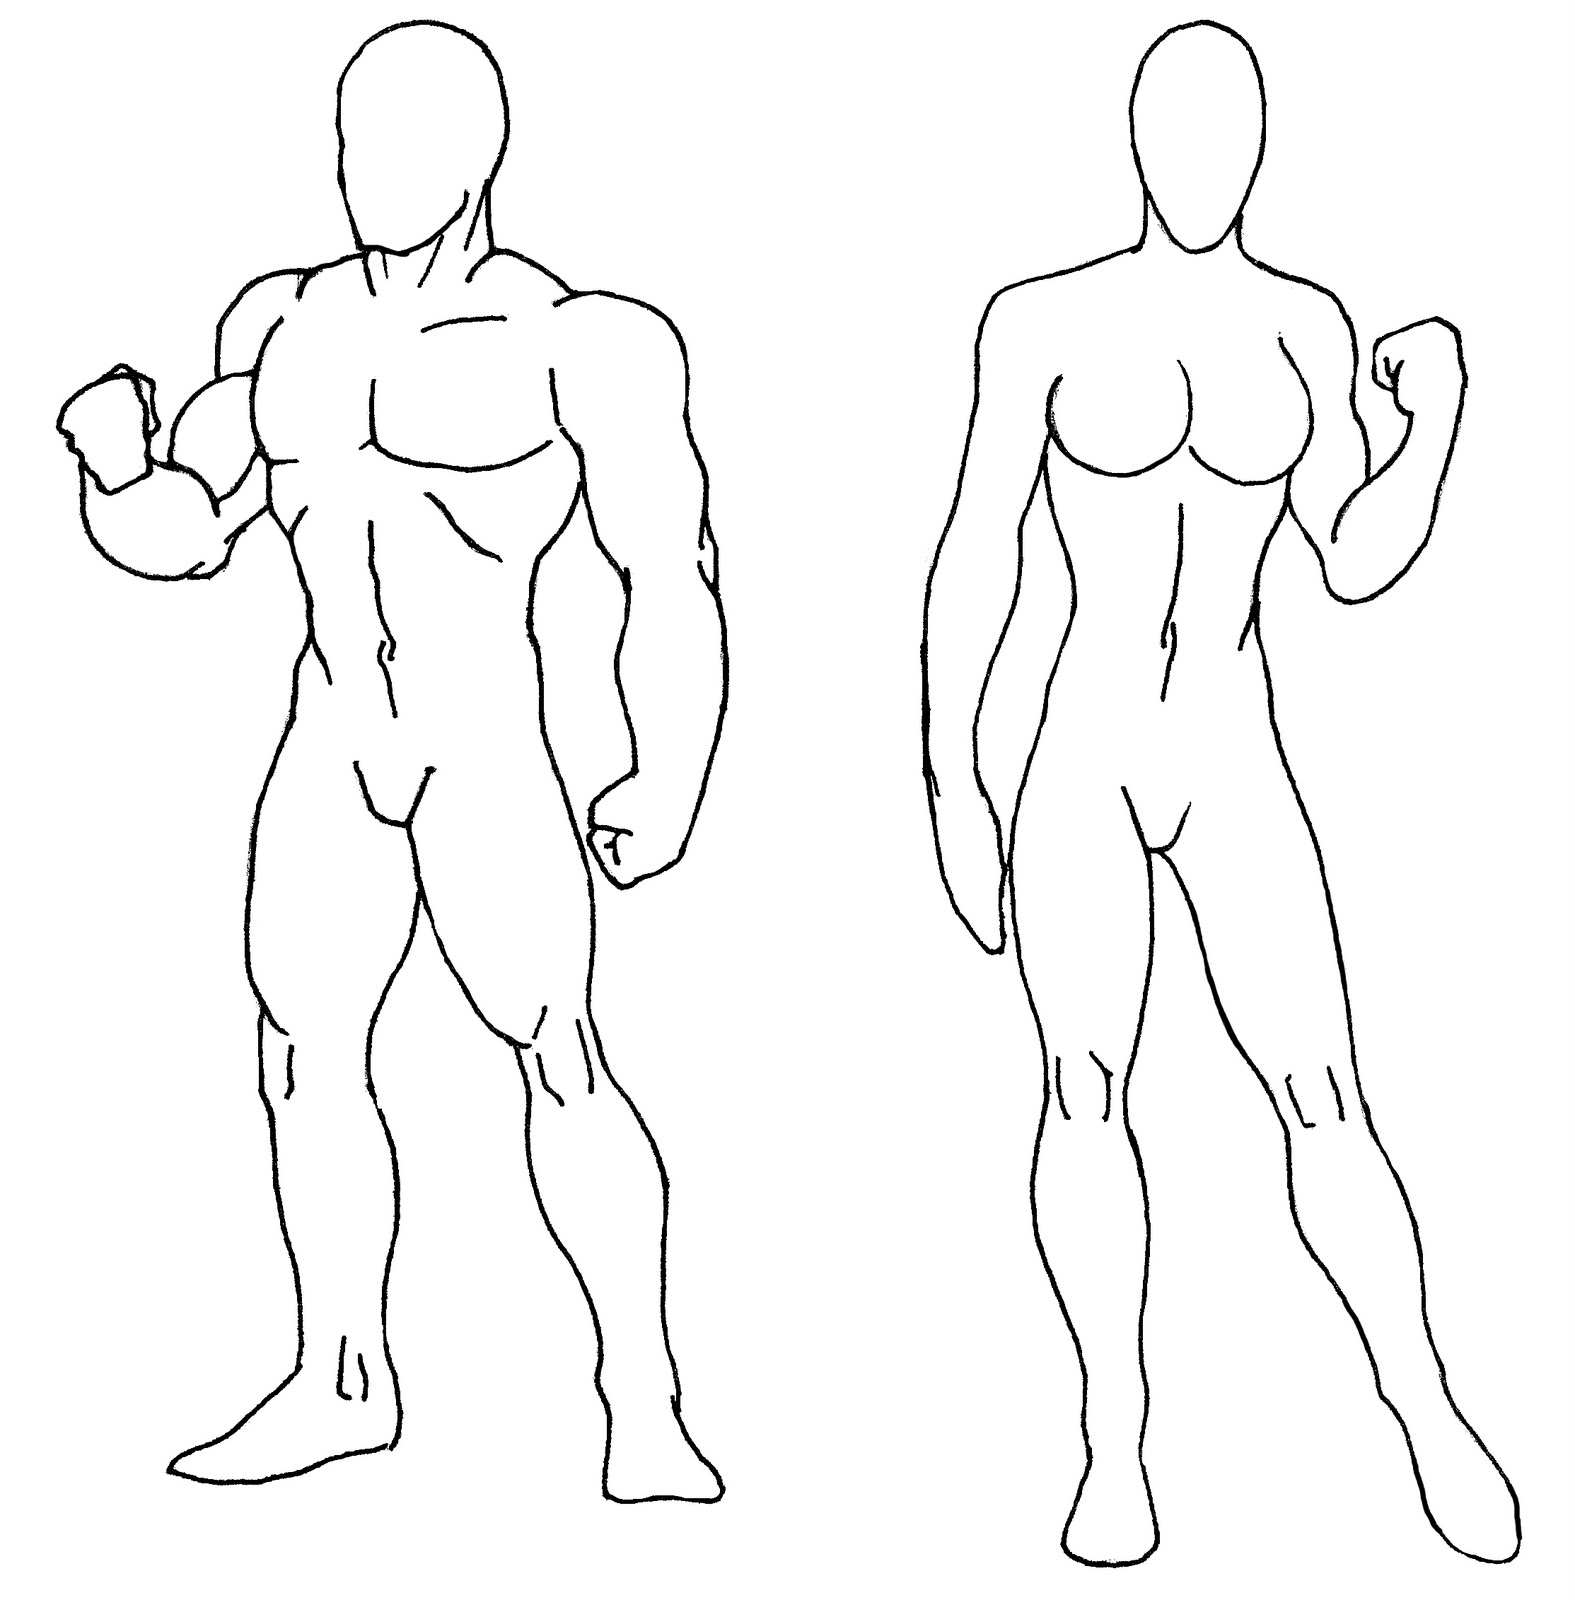 Download Blank Body Drawing Human Of () Drawing Images Regarding Blank Body Map Template